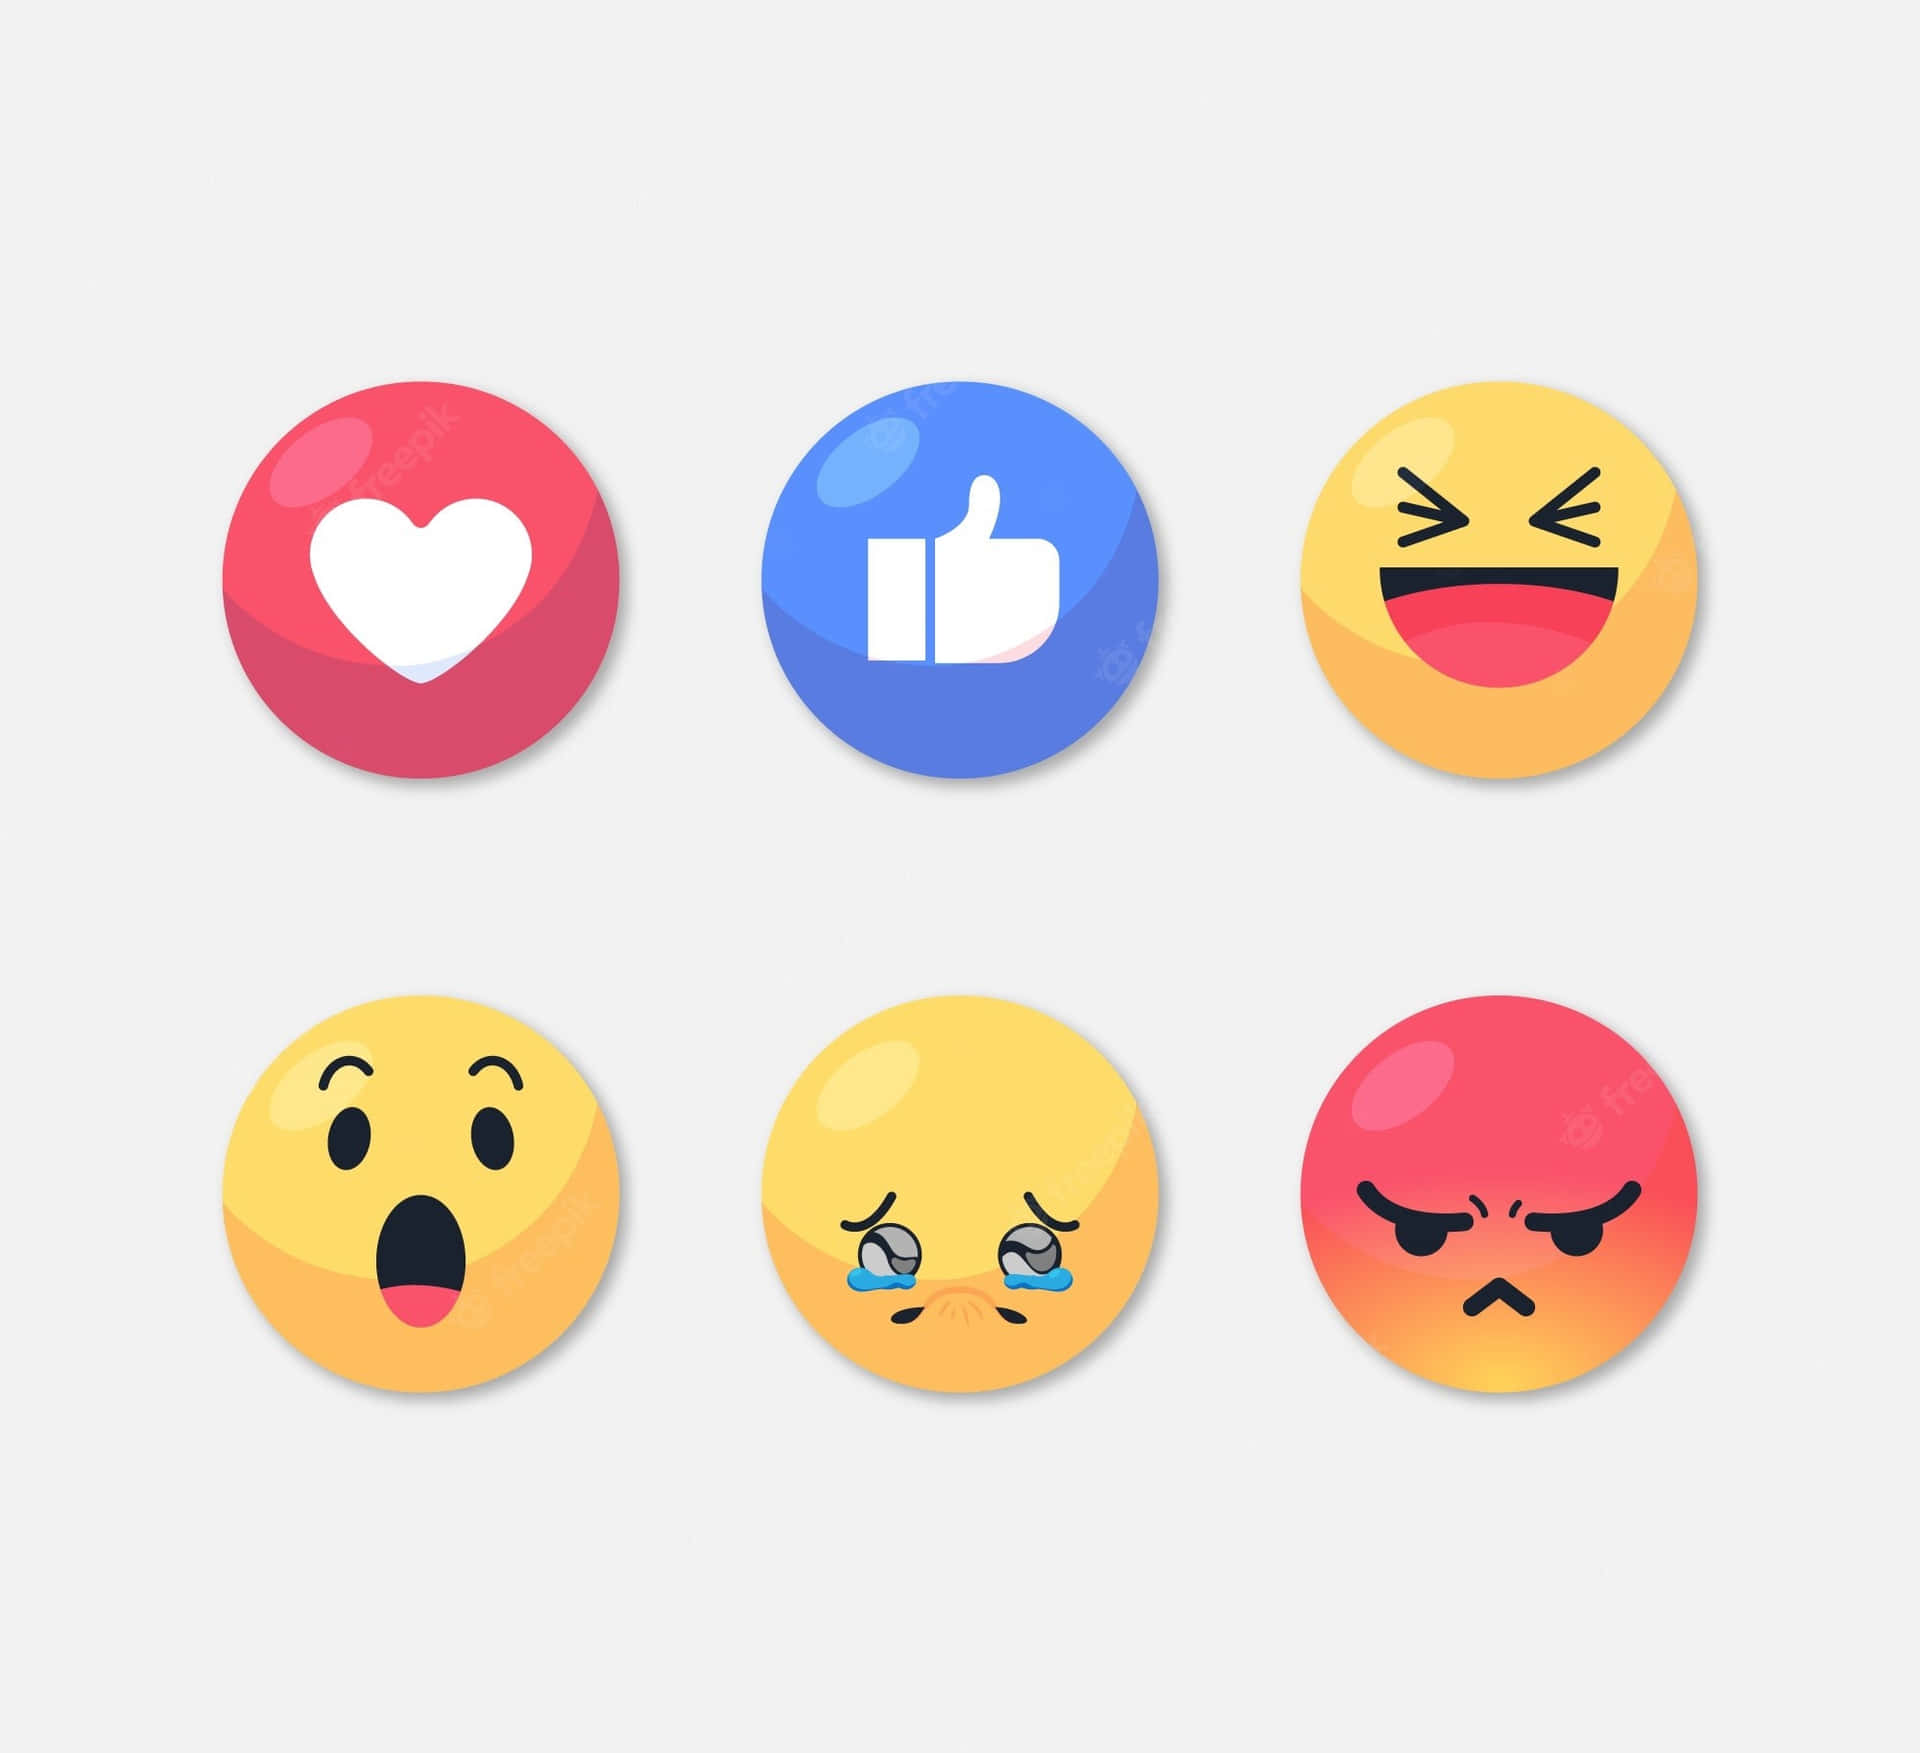 A Set Of Emoticion Buttons With Different Emotions